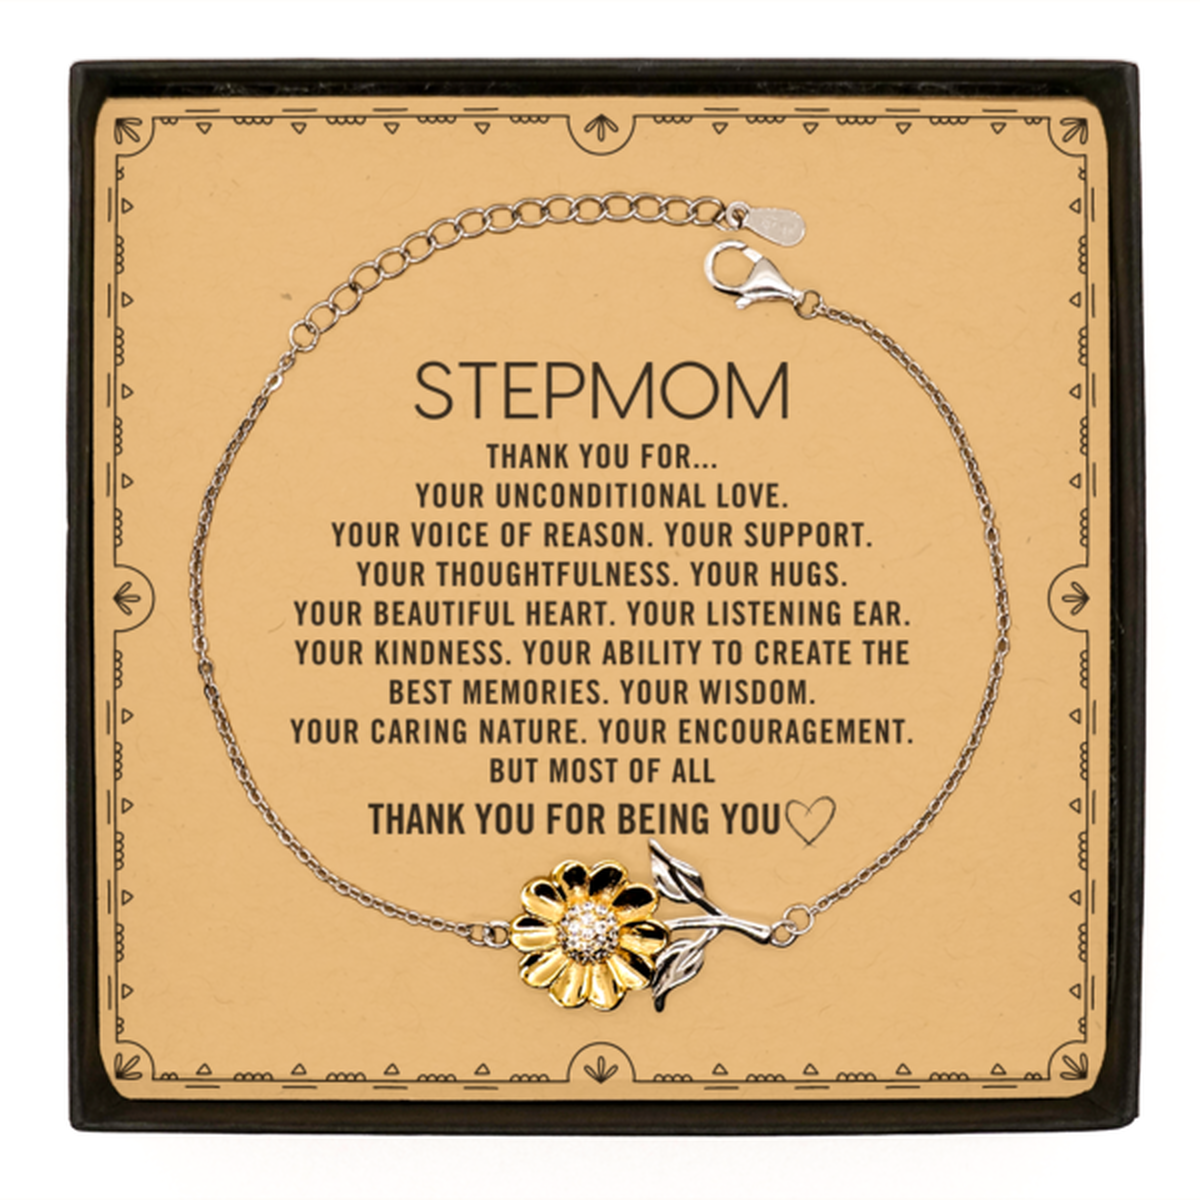 Stepmom Sunflower Bracelet Custom, Message Card Gifts For Stepmom Christmas Graduation Birthday Gifts for Men Women Stepmom Thank you for Your unconditional love